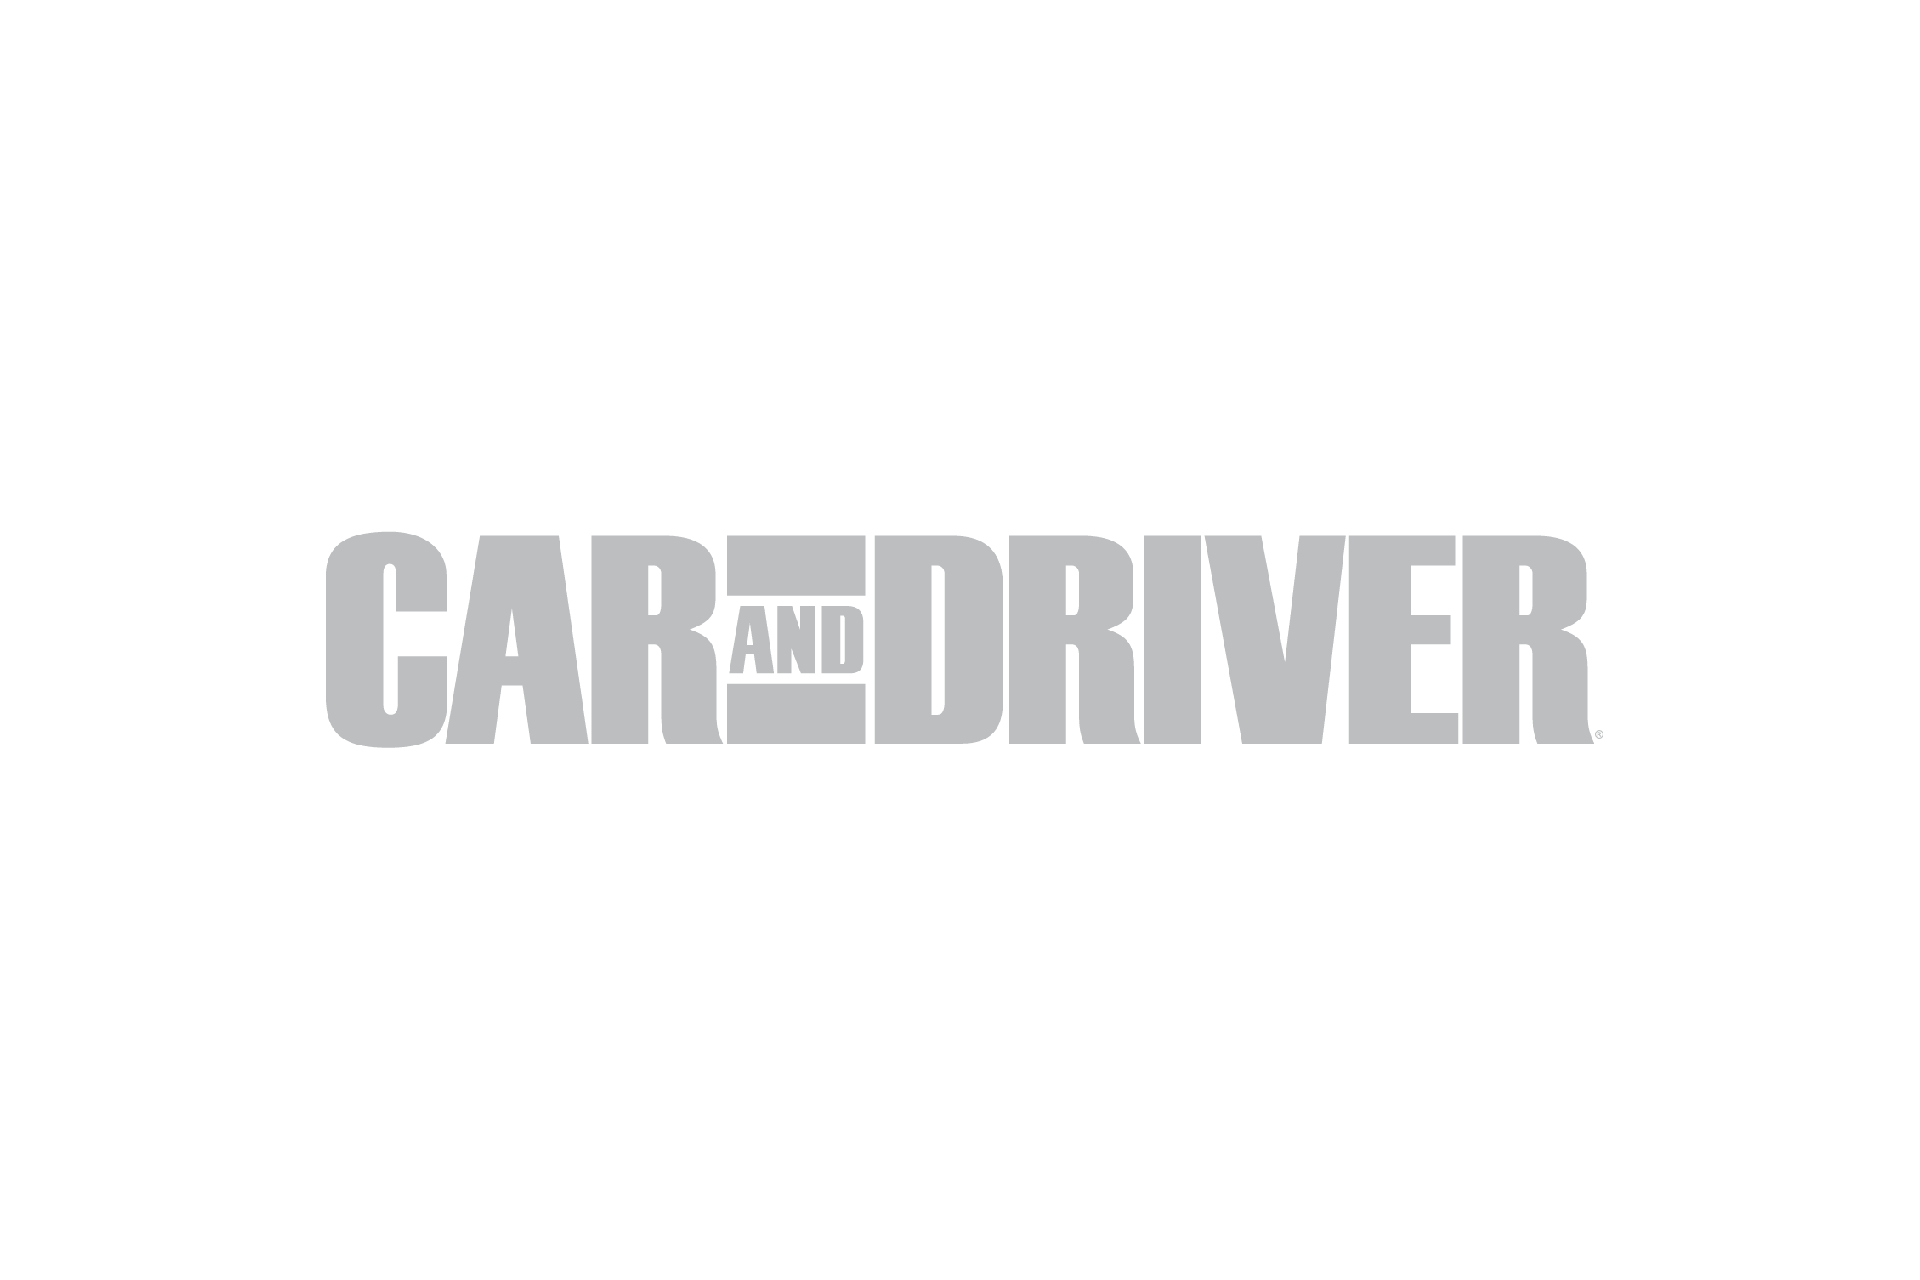 Car and Driver